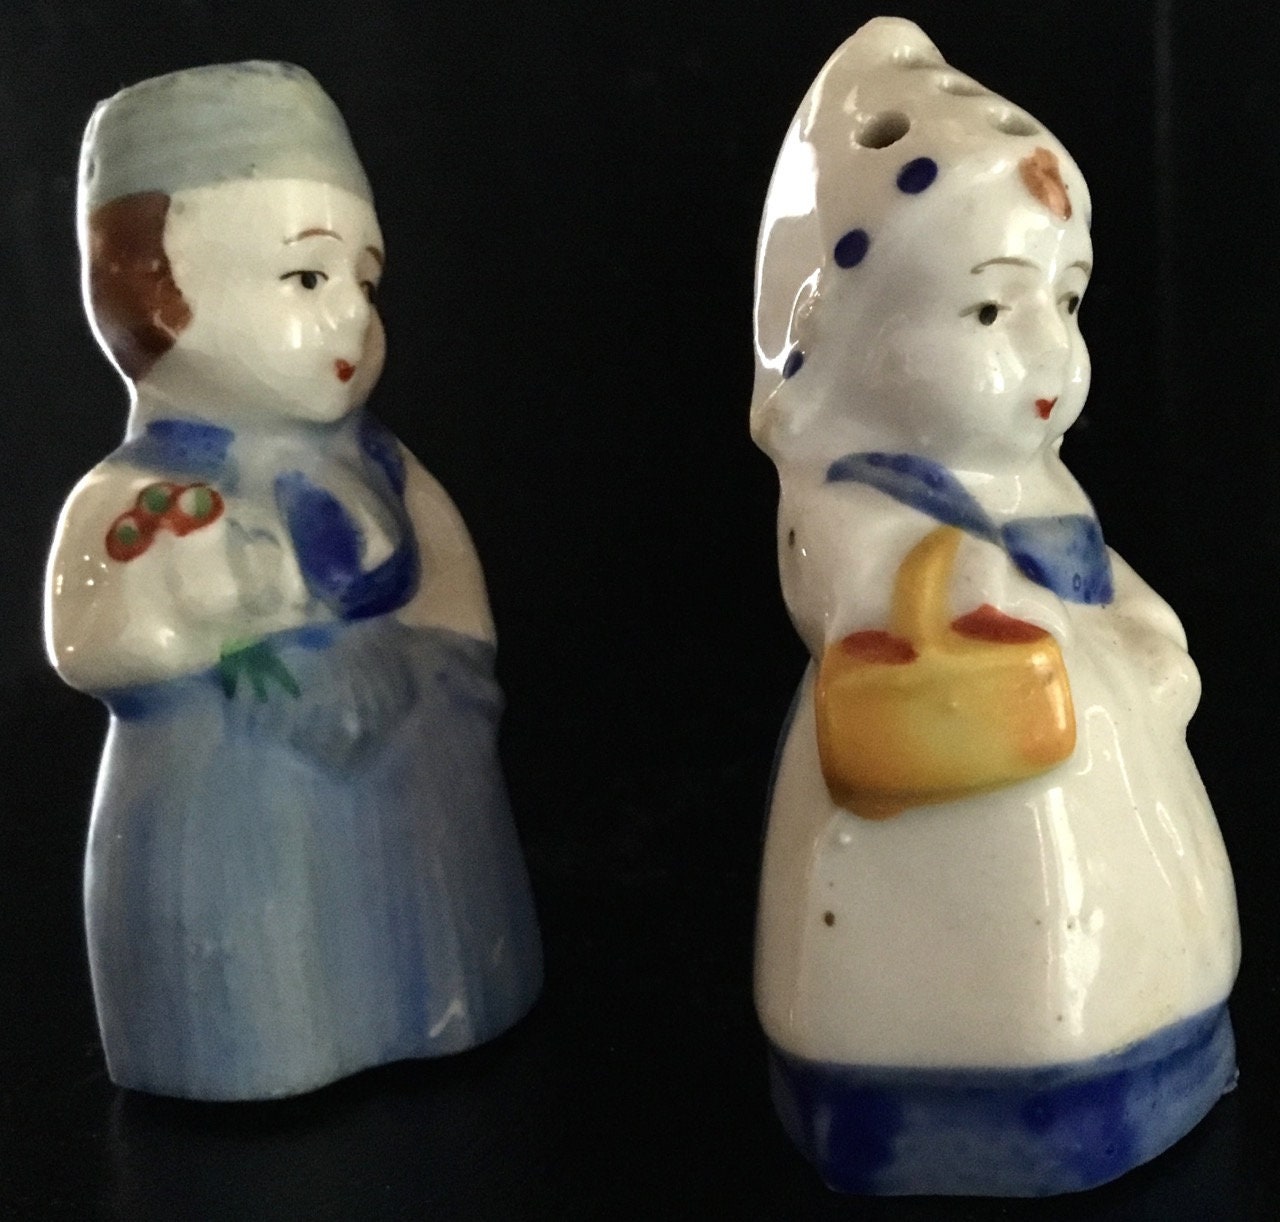 Vintage 1950s Dutch Boy and Girl Salt and Pepper Shakers - Etsy